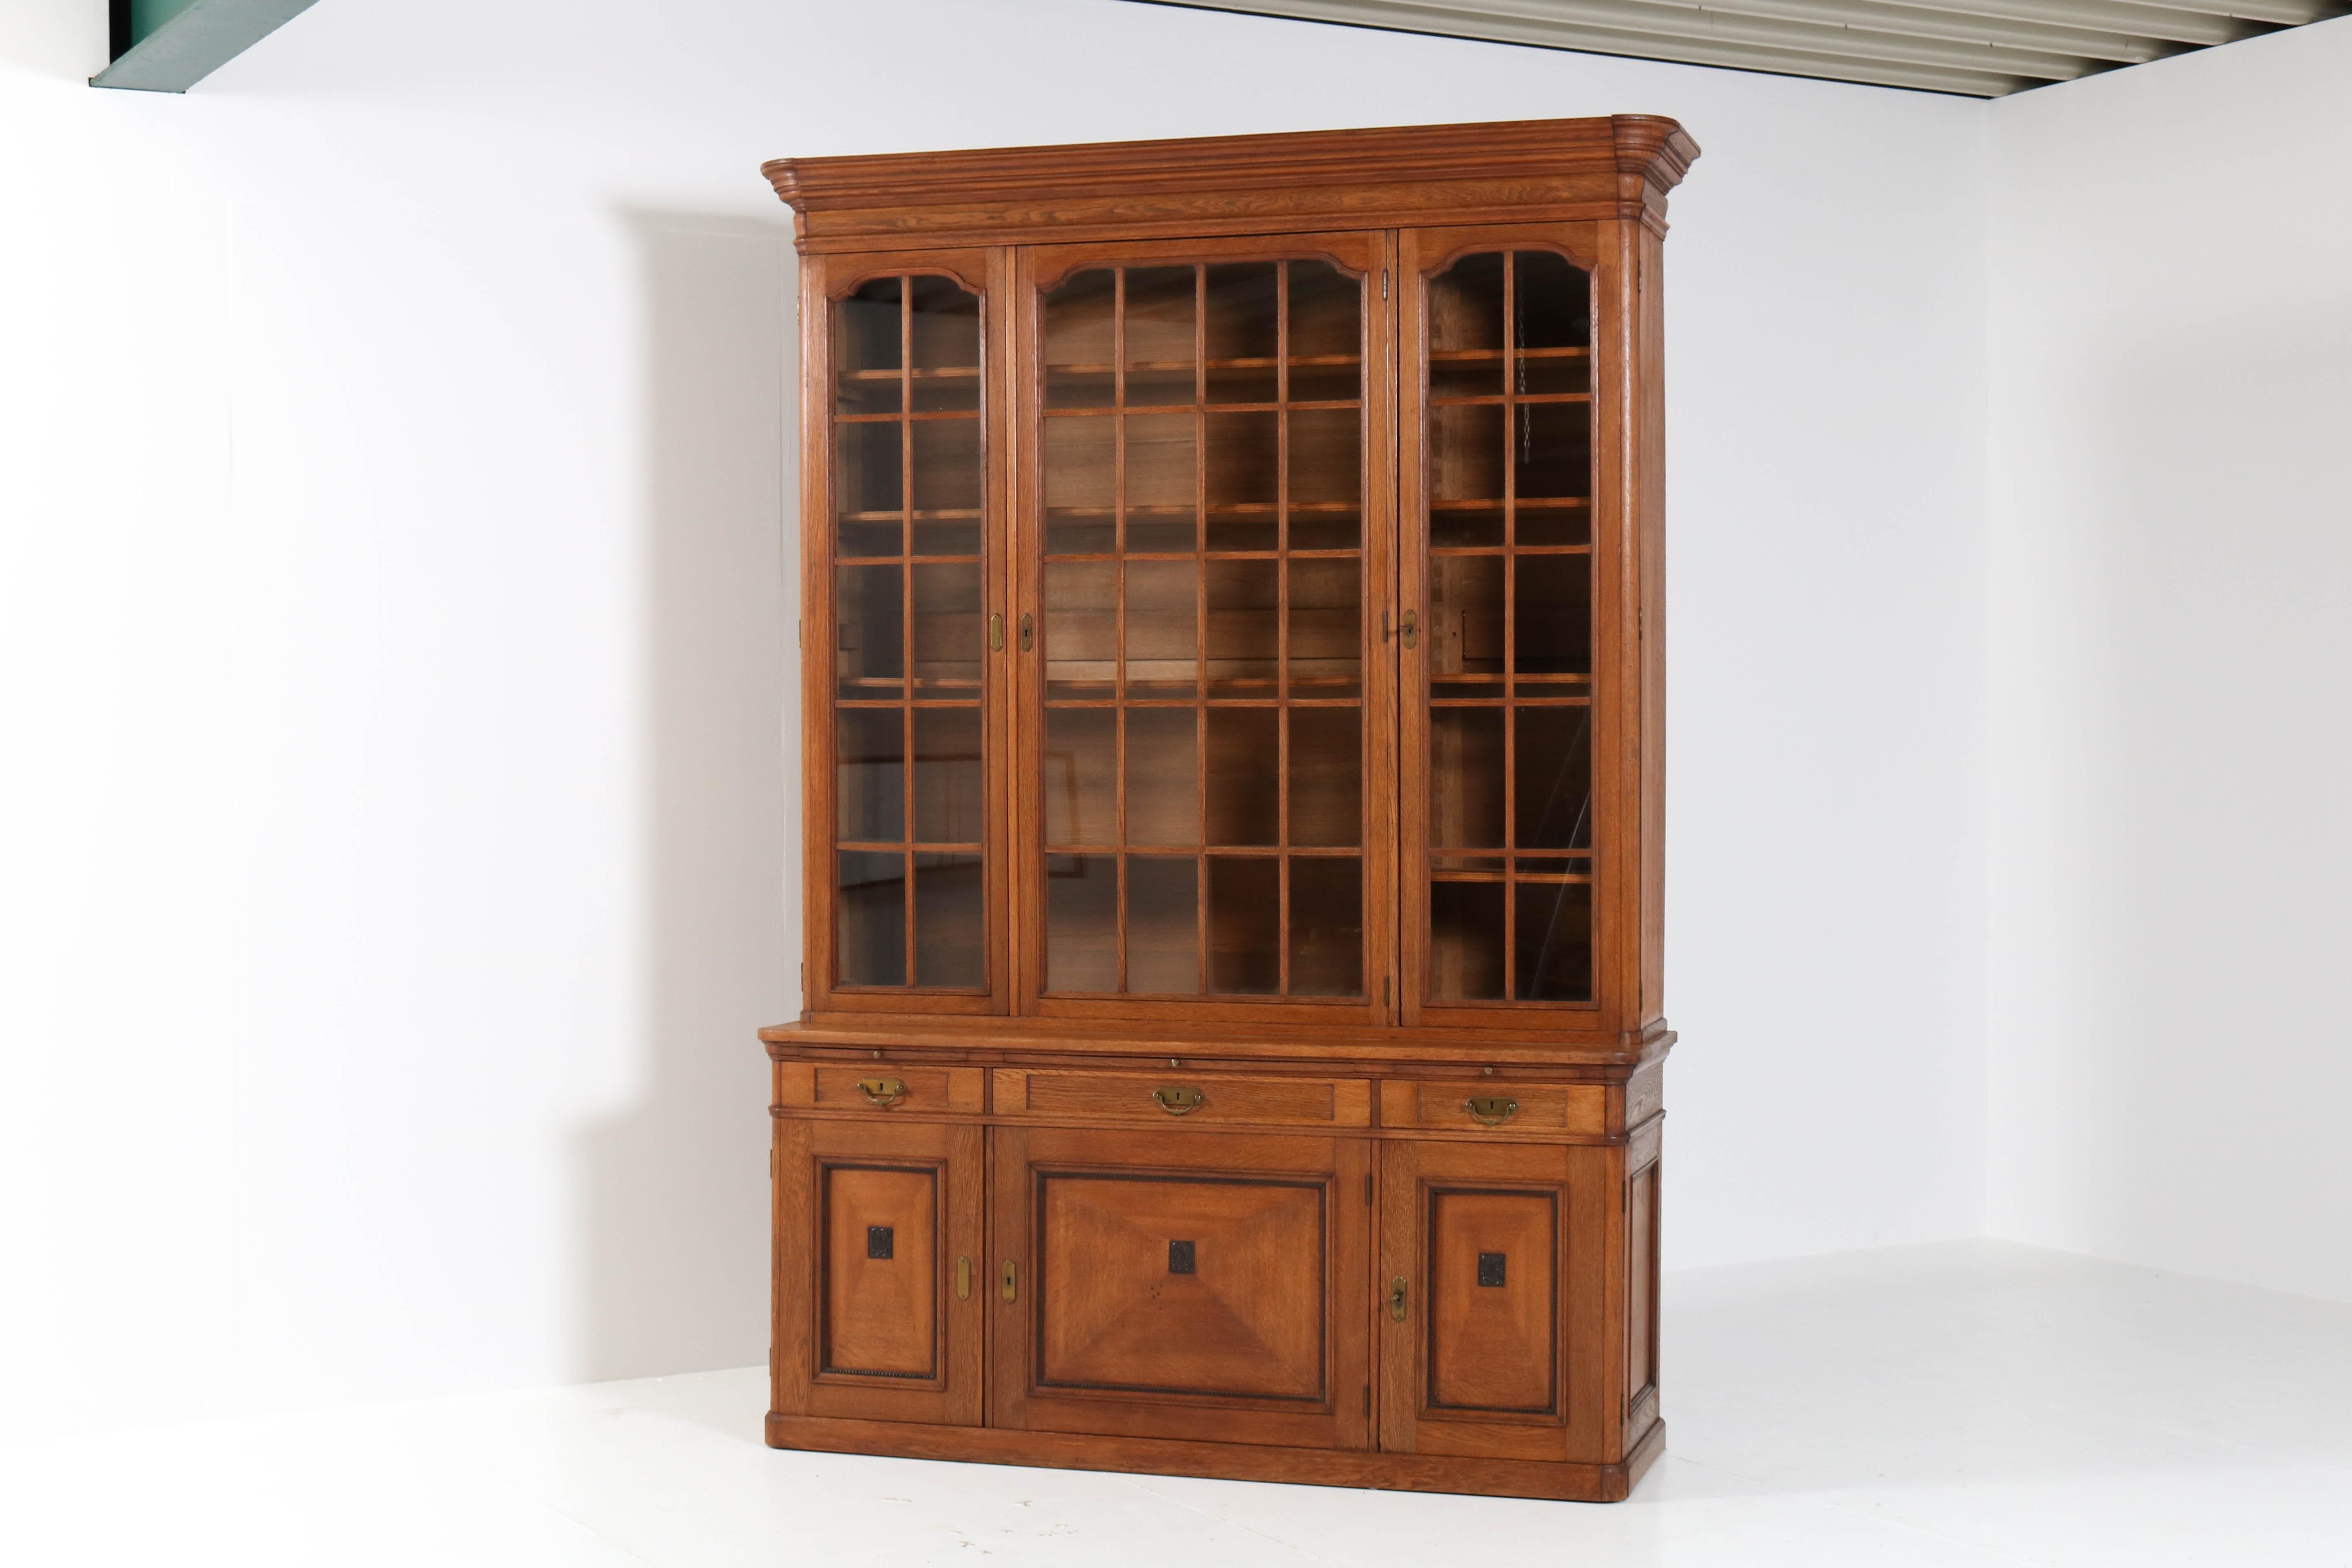 Stunning and rare Art Nouveau library bookcase.
Design by H. Pander & Zonen Den Haag.
Striking Dutch design from the 1900s.
Solid oak with original brass handles on the drawers.
Marked with metal tag,see image 15 and on one key.
This wonderful